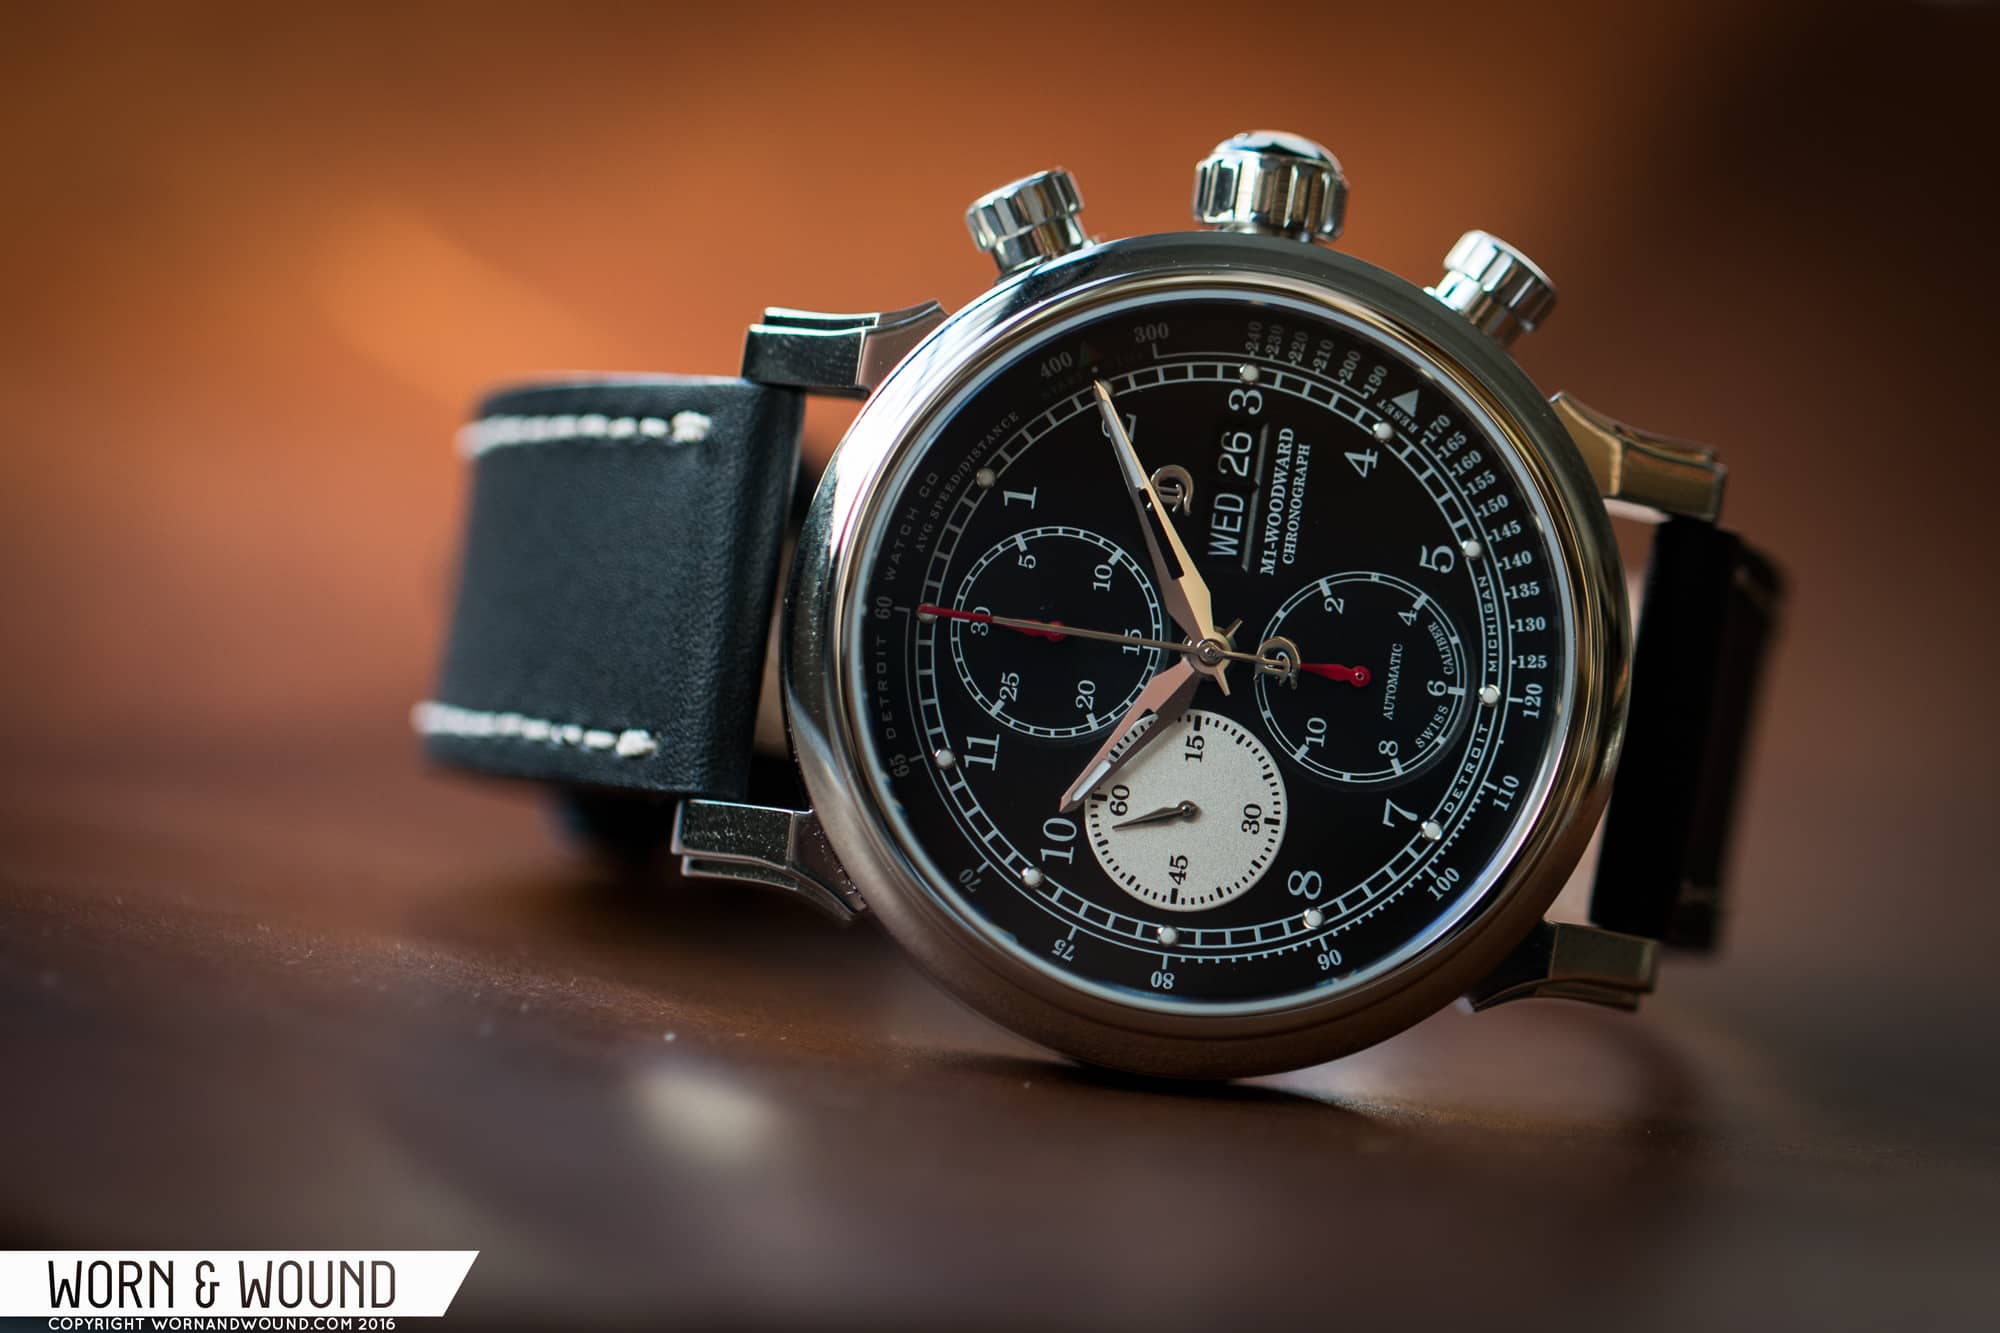 Detroit Watch Company] Thinking about ordering this beautiful M1